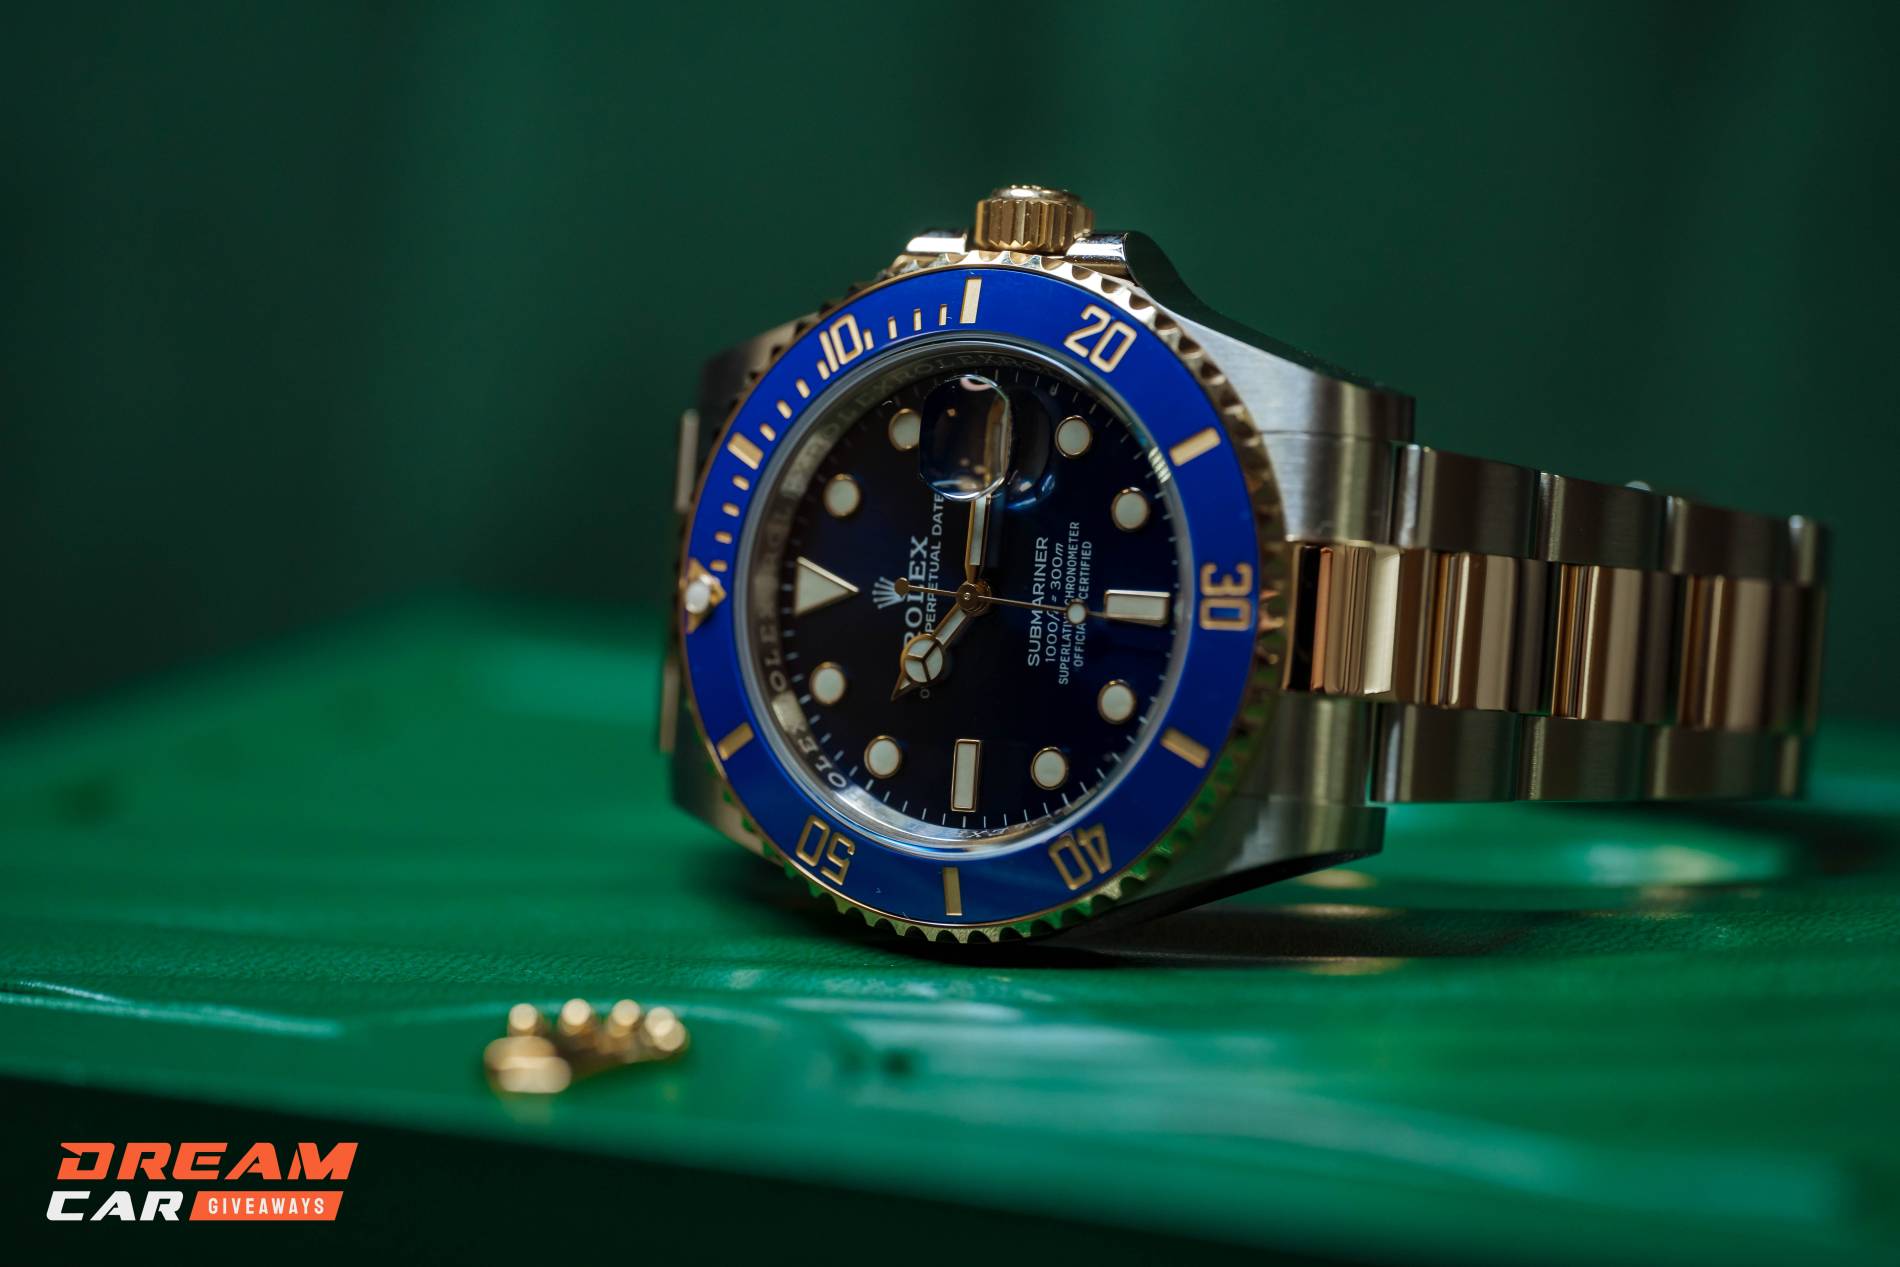 Win this Rolex Submariner 'Bluesy' or £10,000 Tax Free